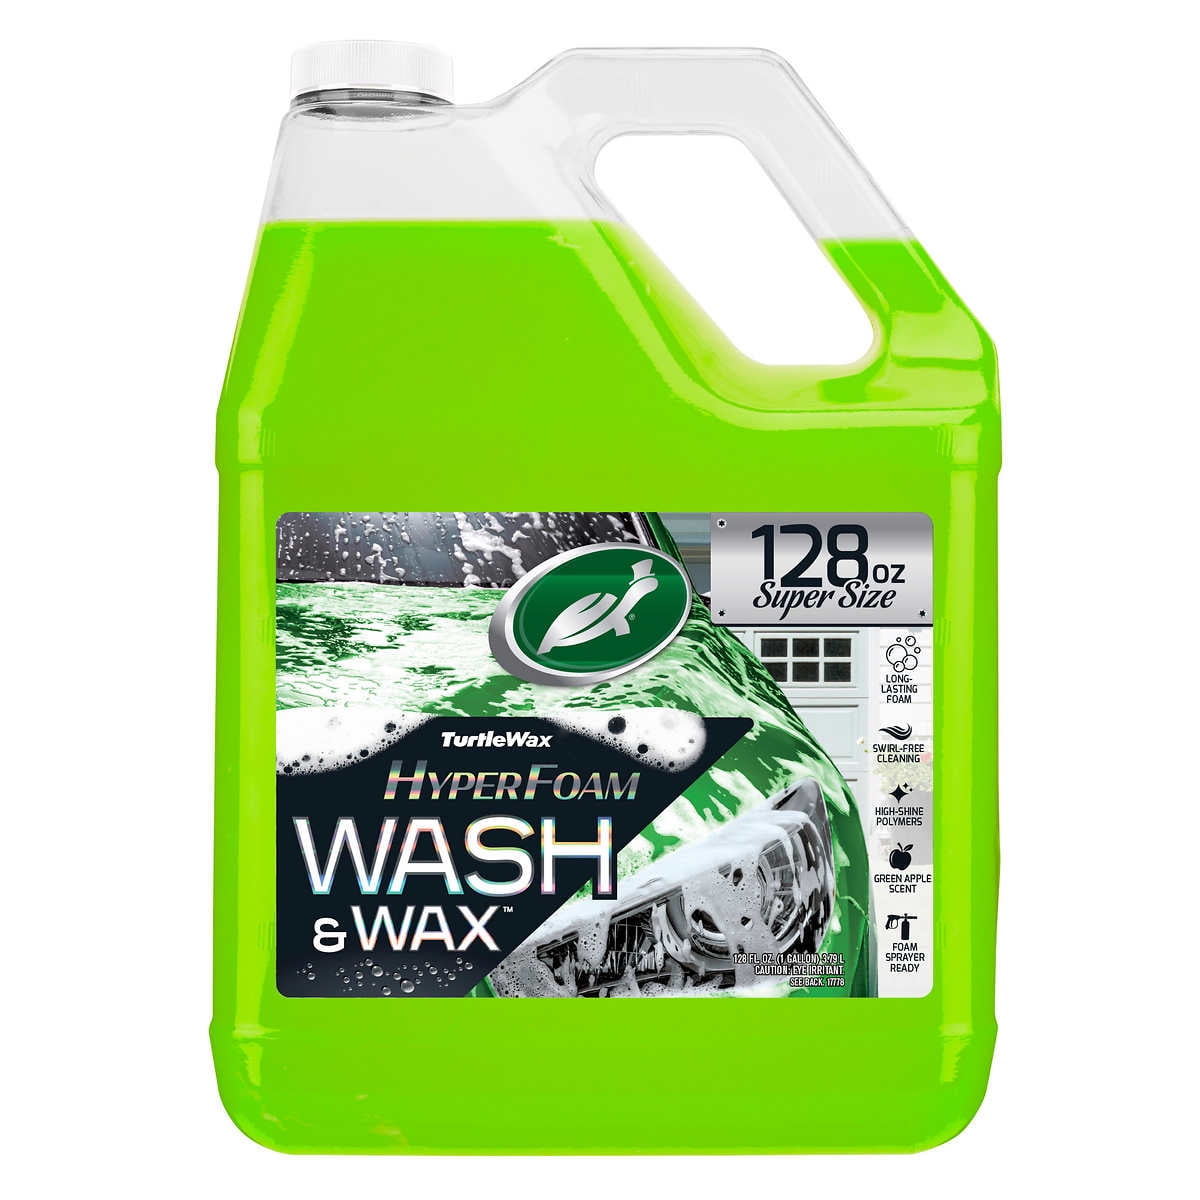 Wizards Car Wash - Super Concentrated Car Wash Soap - No Salt Biodegradable Car  Wash Soap With Thick Foam - Exterior Care Products For Marine Use - Foam  Cannon Soap For Car